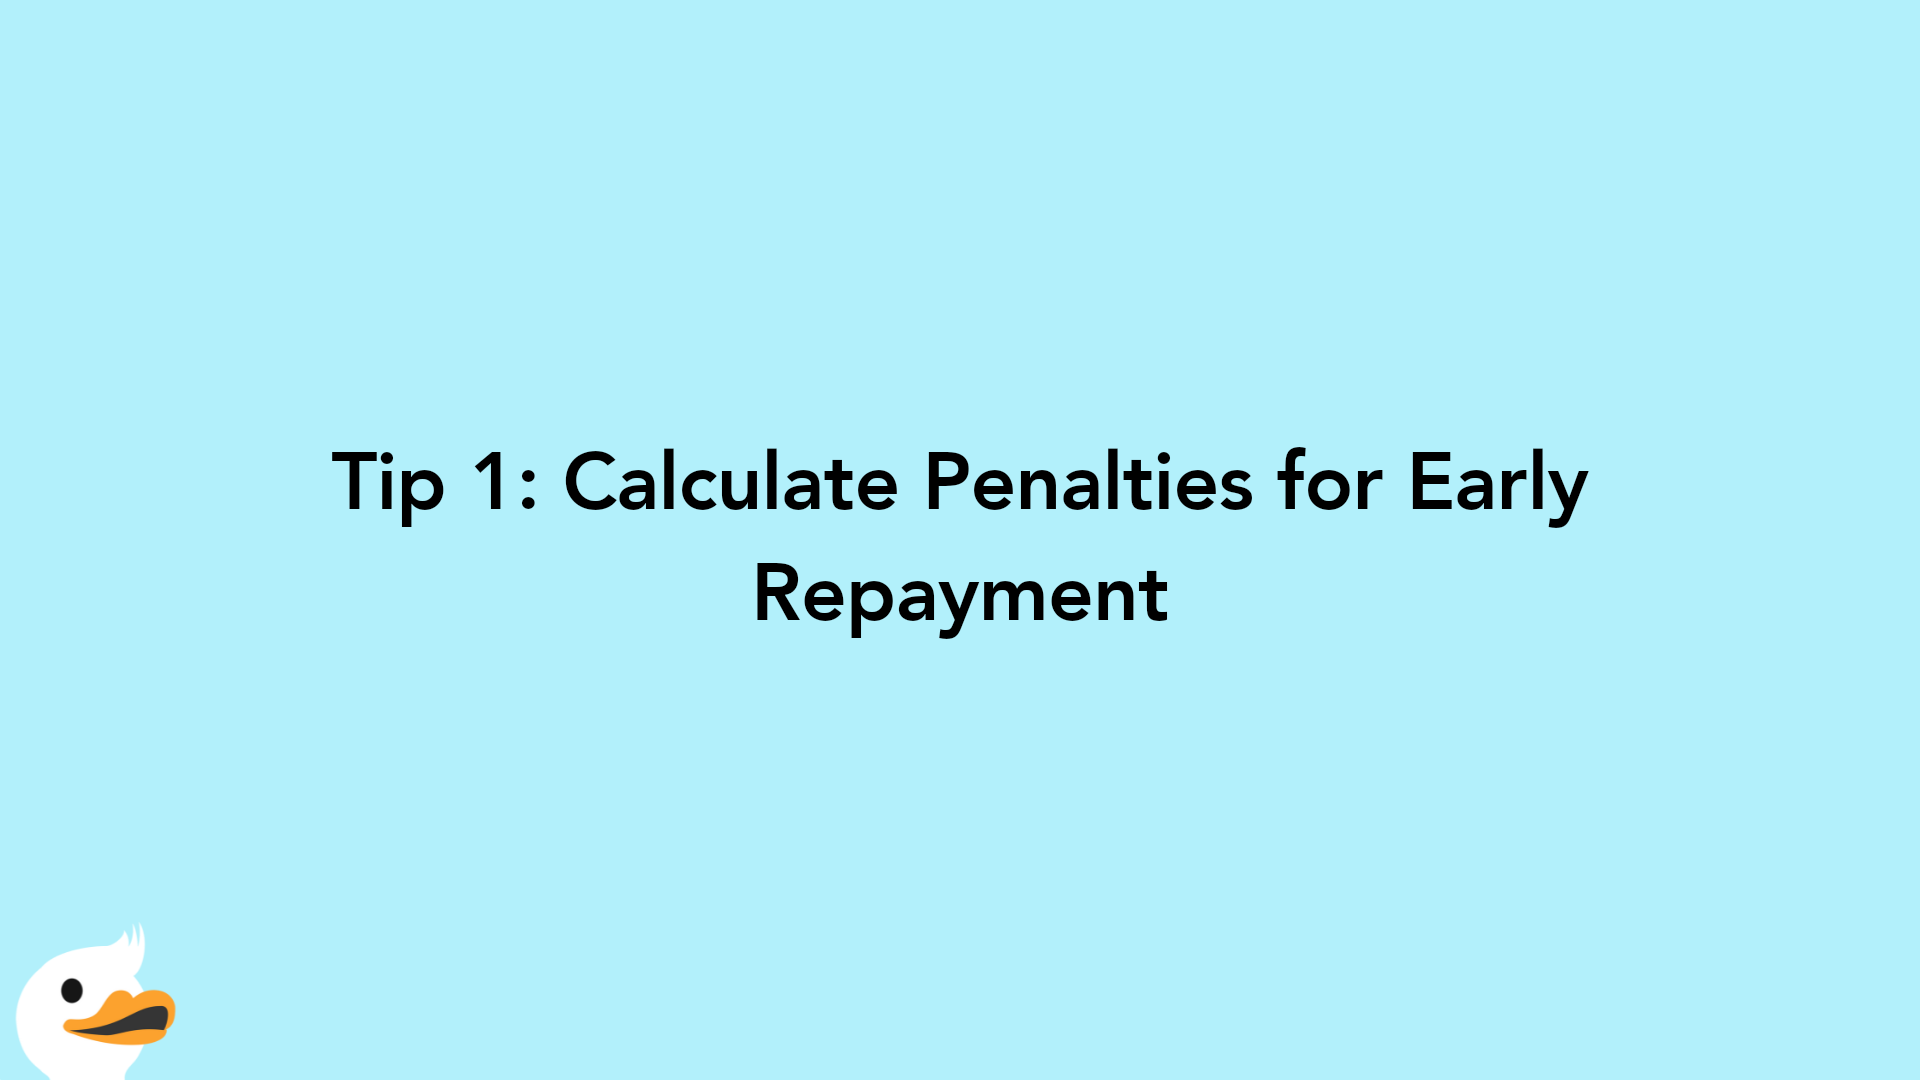 Tip 1: Calculate Penalties for Early Repayment